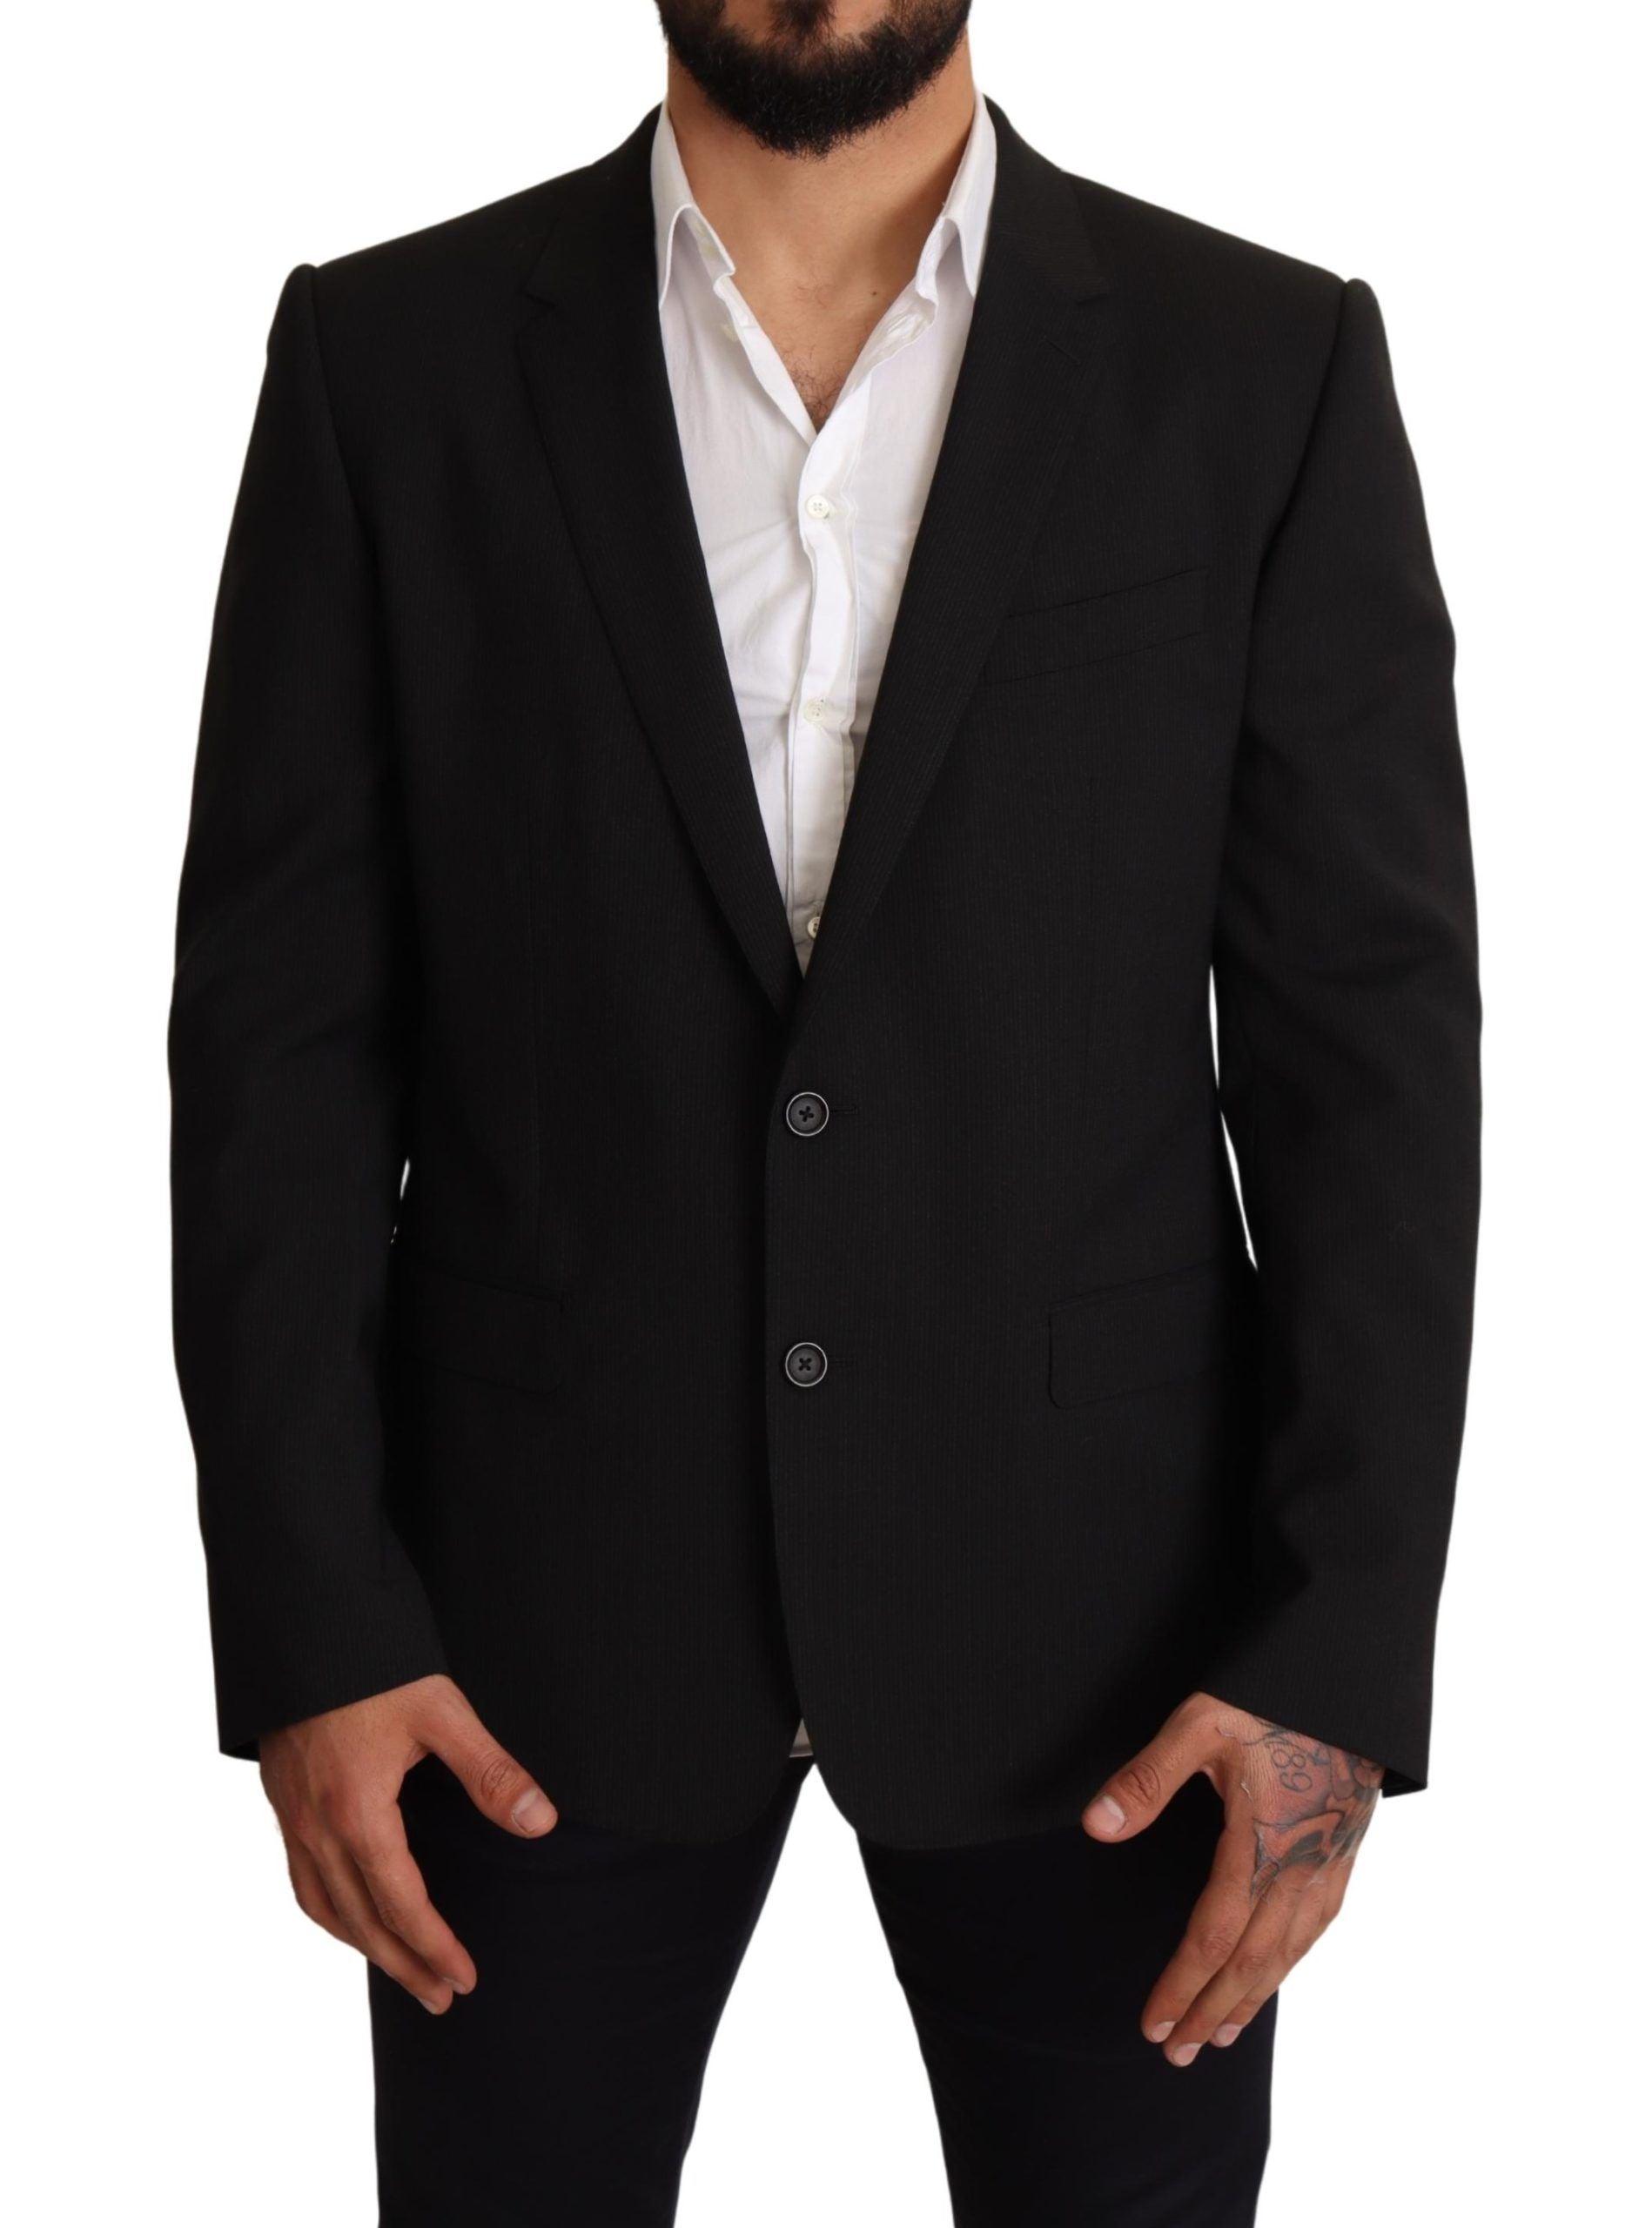 Black Striped MARTINI Jacket Blazer - Designed by Dolce & Gabbana Available to Buy at a Discounted Price on Moon Behind The Hill Online Designer Discount Store